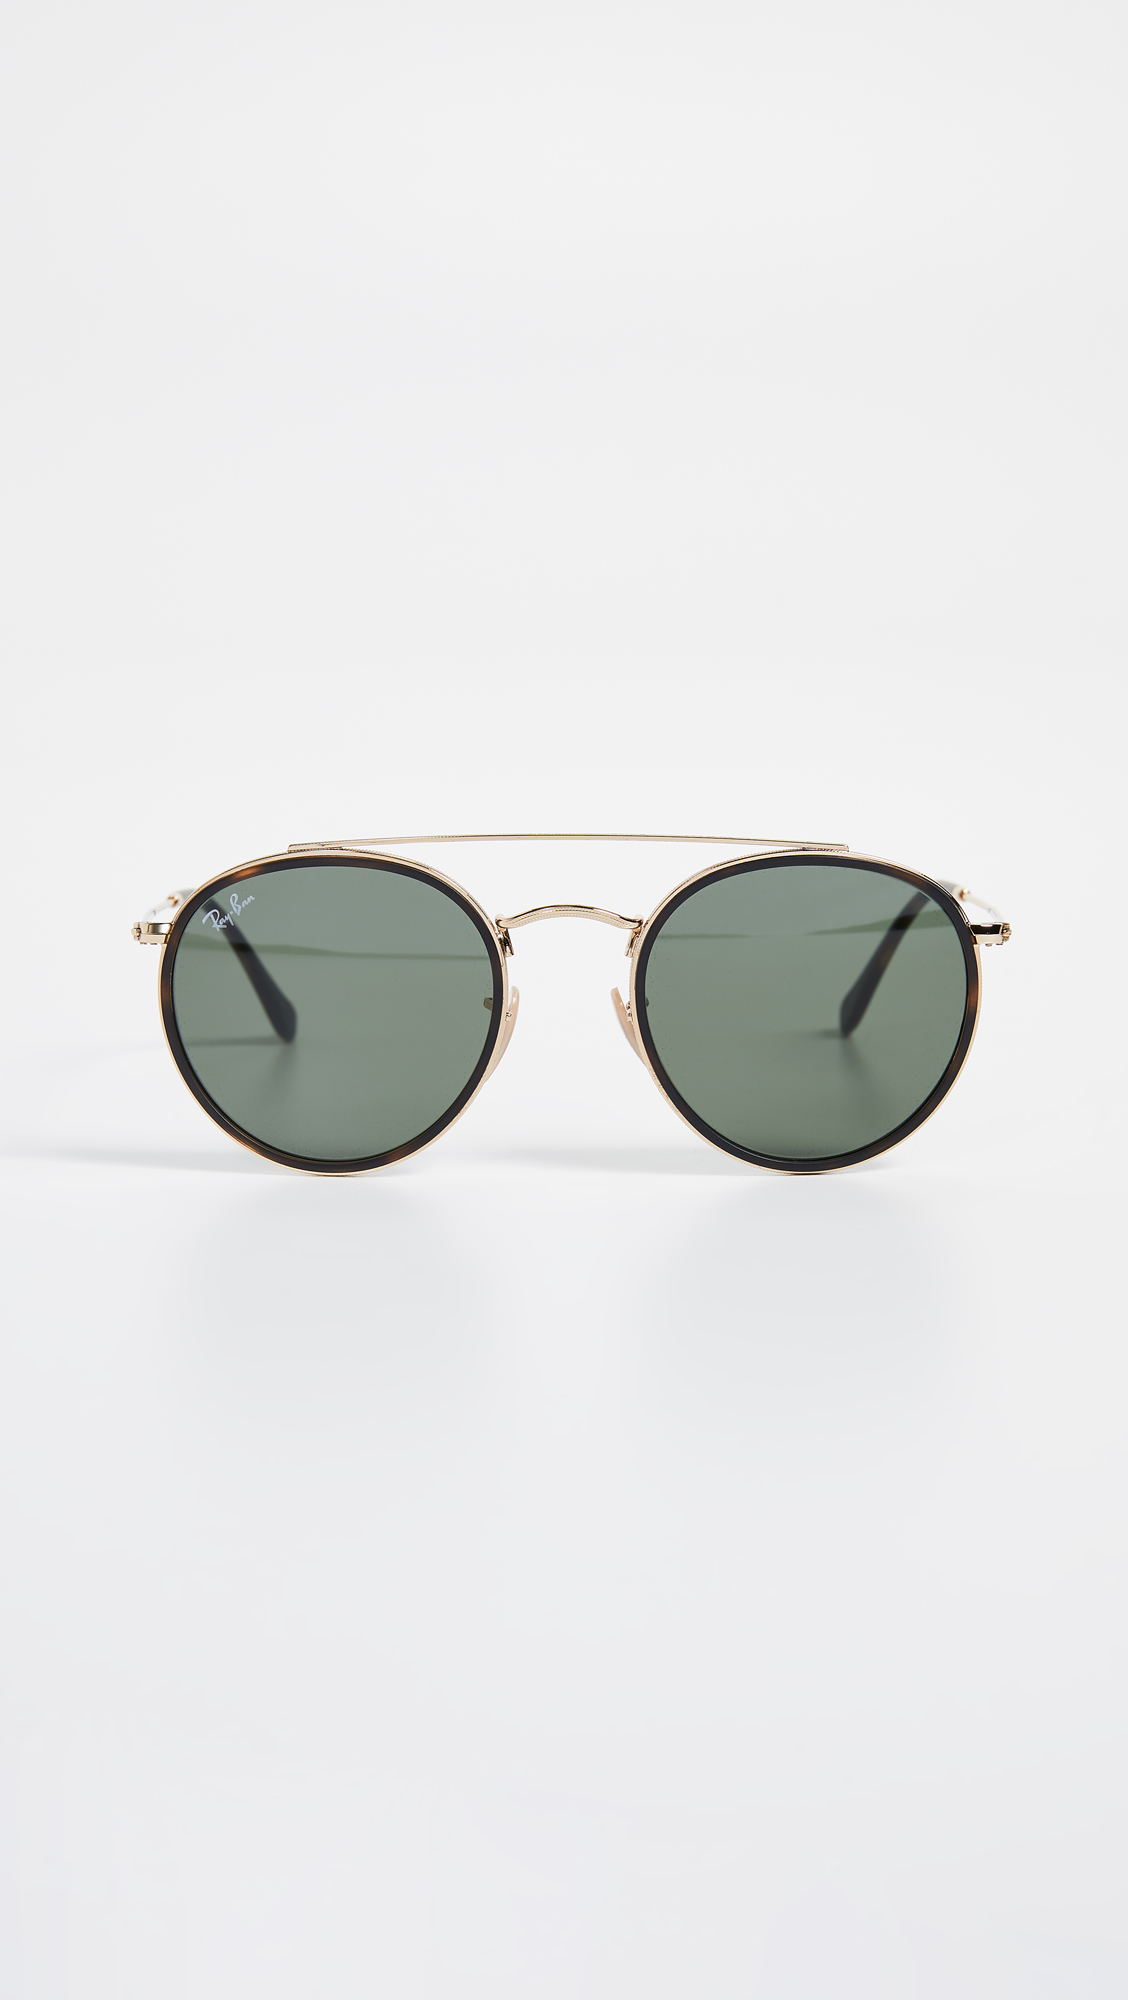 check ray ban serial number online